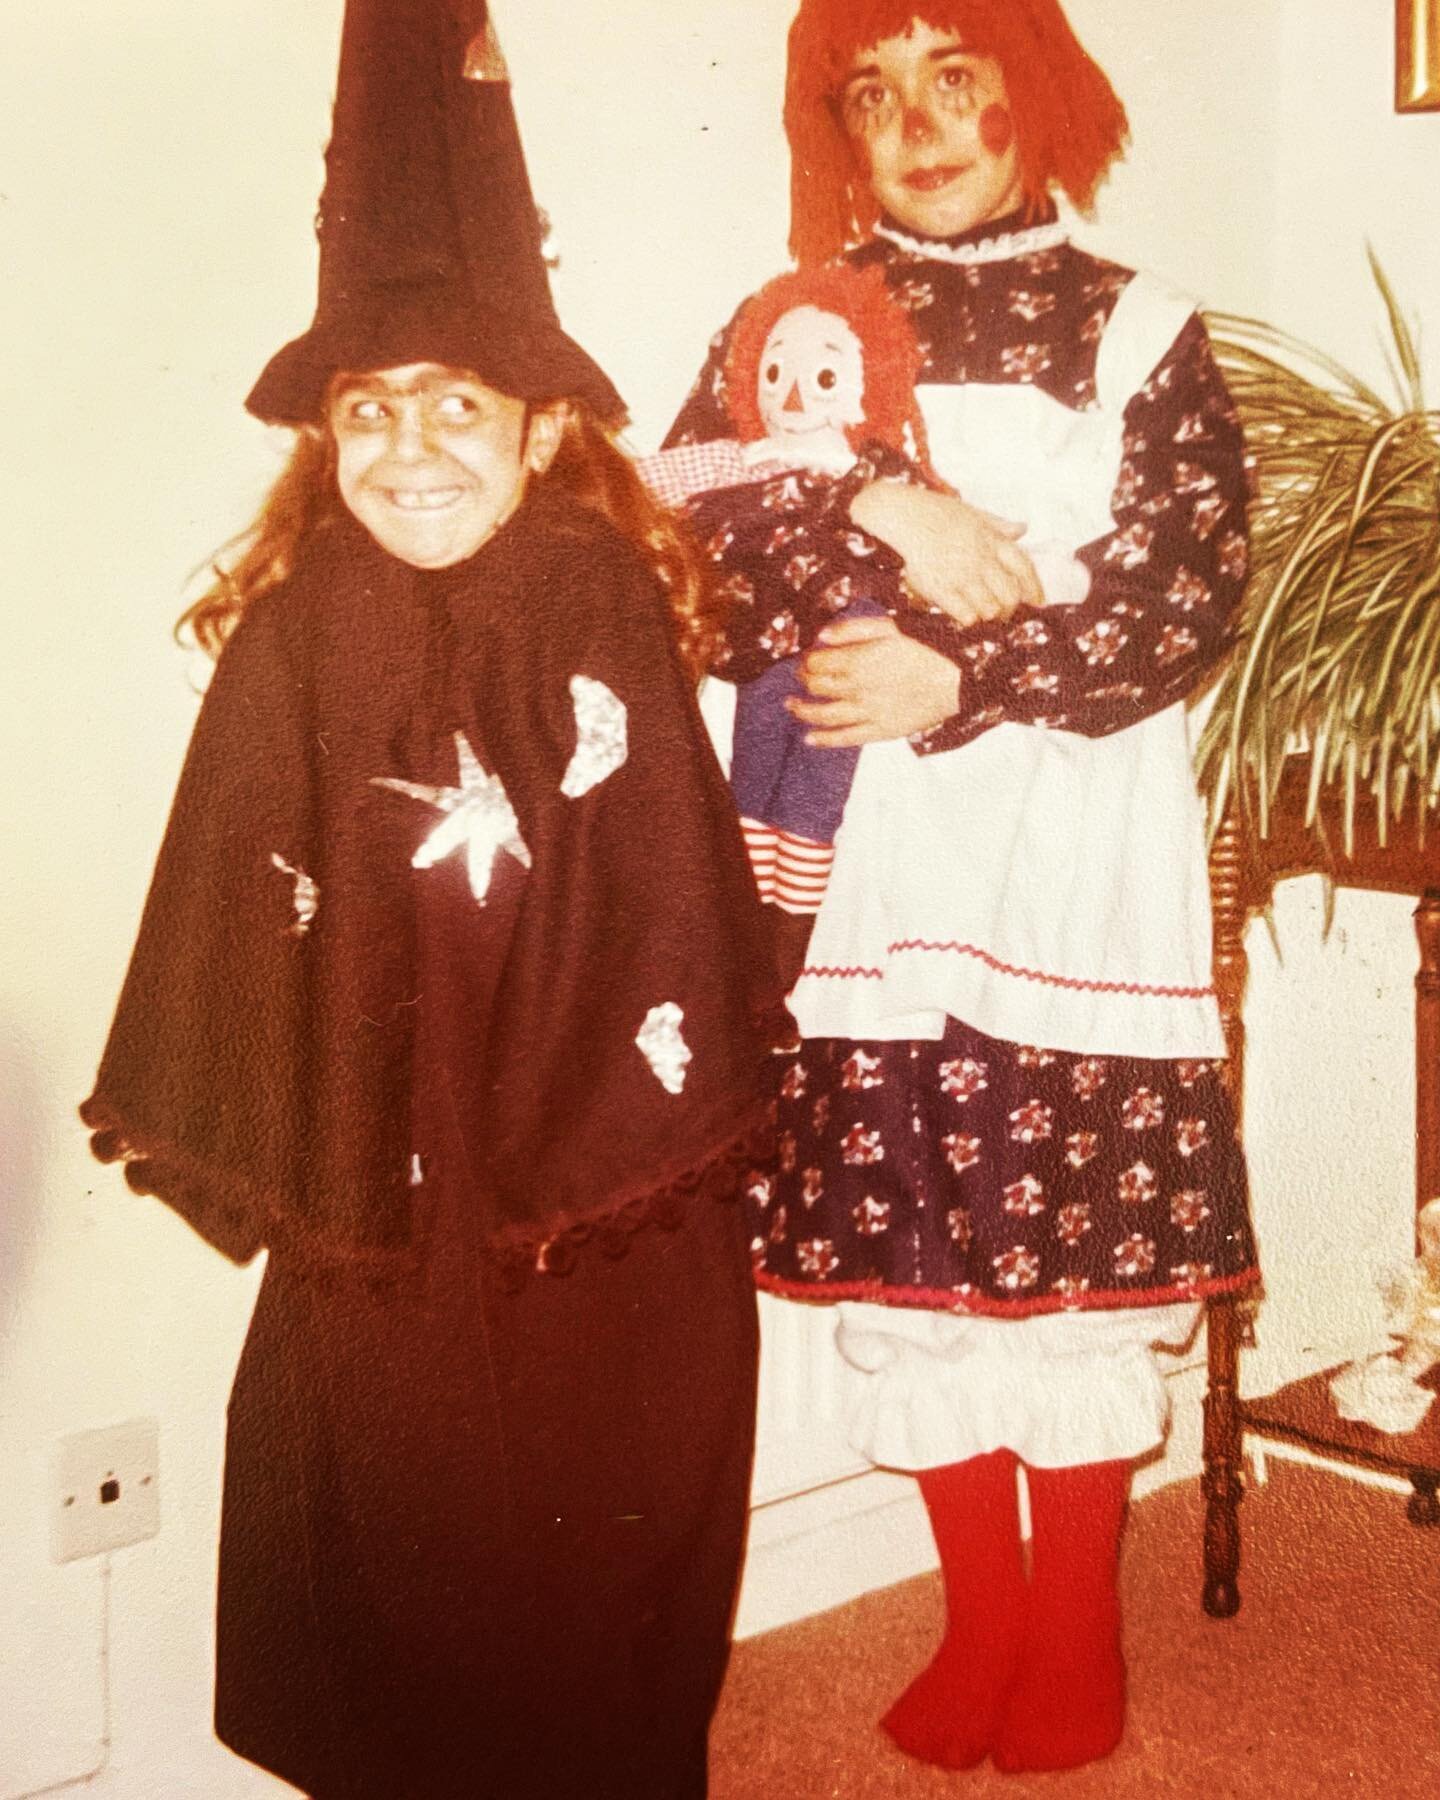 You could say I was #bornready for Halloween!! 🧙&zwj;♀️ (and -yes- I really DO love getting into character! 😂) so nice to find this old pic of me and my sis ready to trick-or-treat in our awesome homemade costumes! Thanks mom!!!!💗💗 #waybackwednes